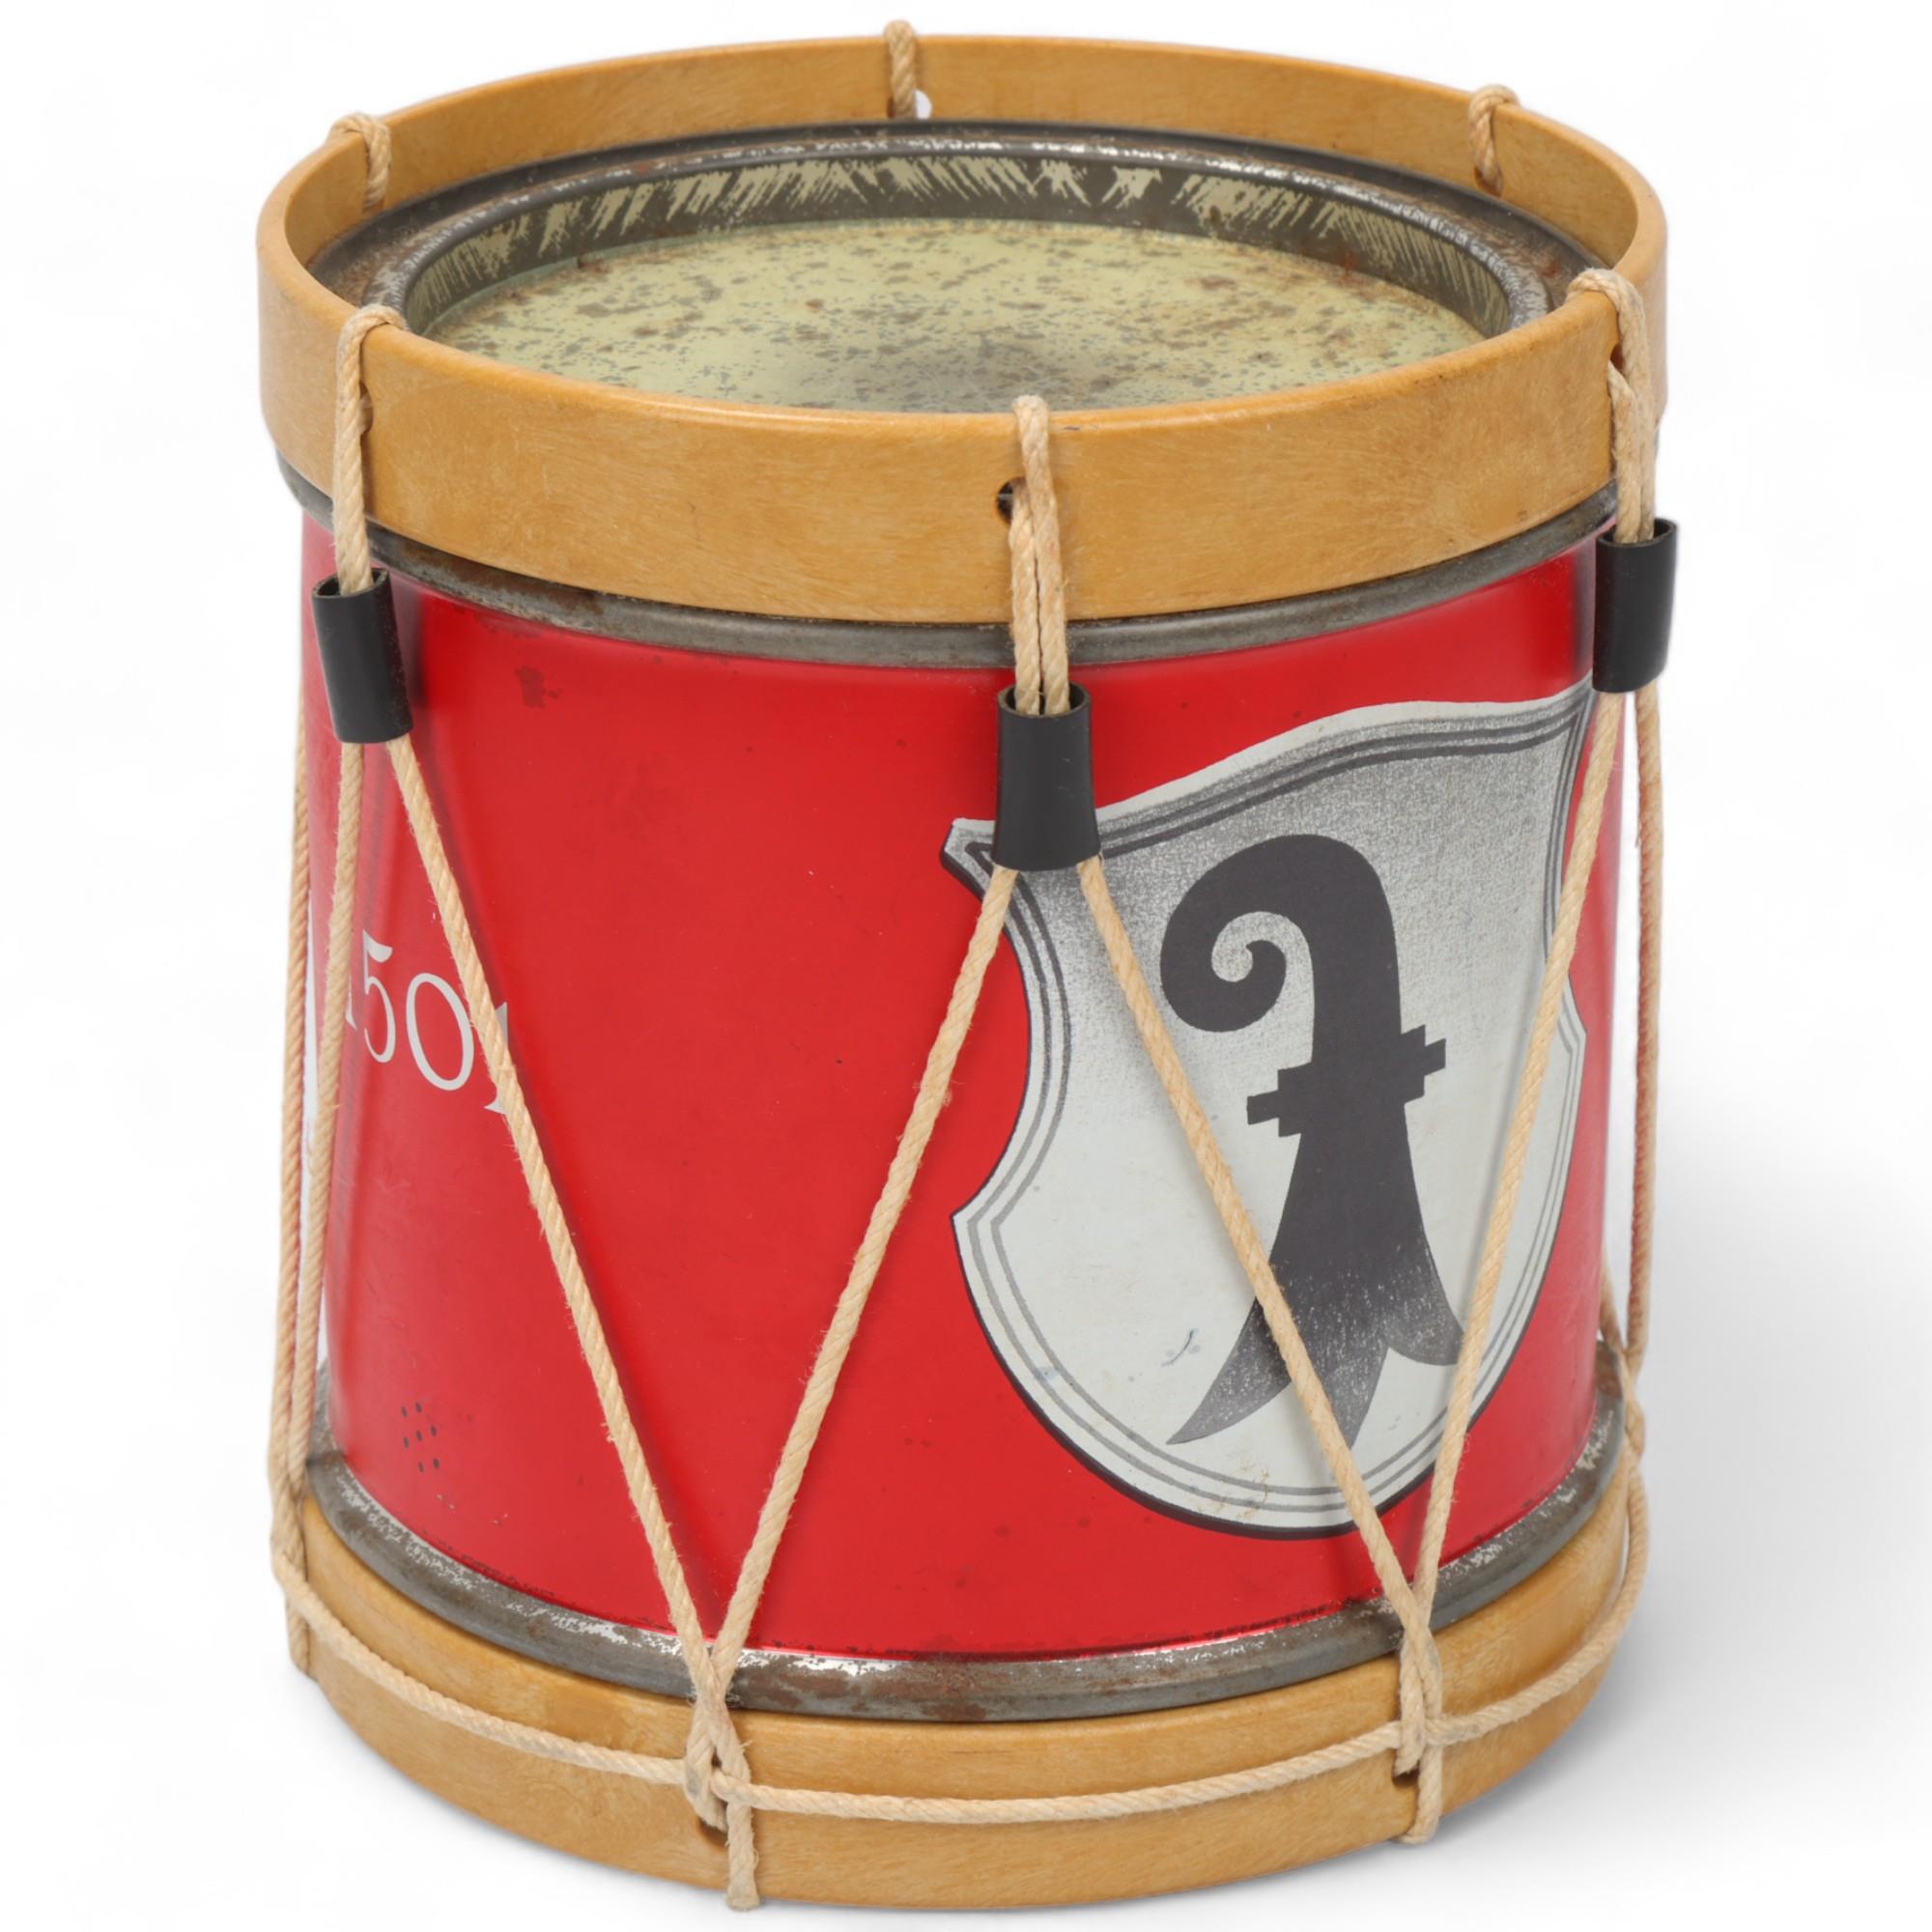 A 1920s/30s Swiss tin COOKIE JAR DRUM owned by MITCH MITCHELL of the JIMI HENDRIX EXPERIENCE. 'I was